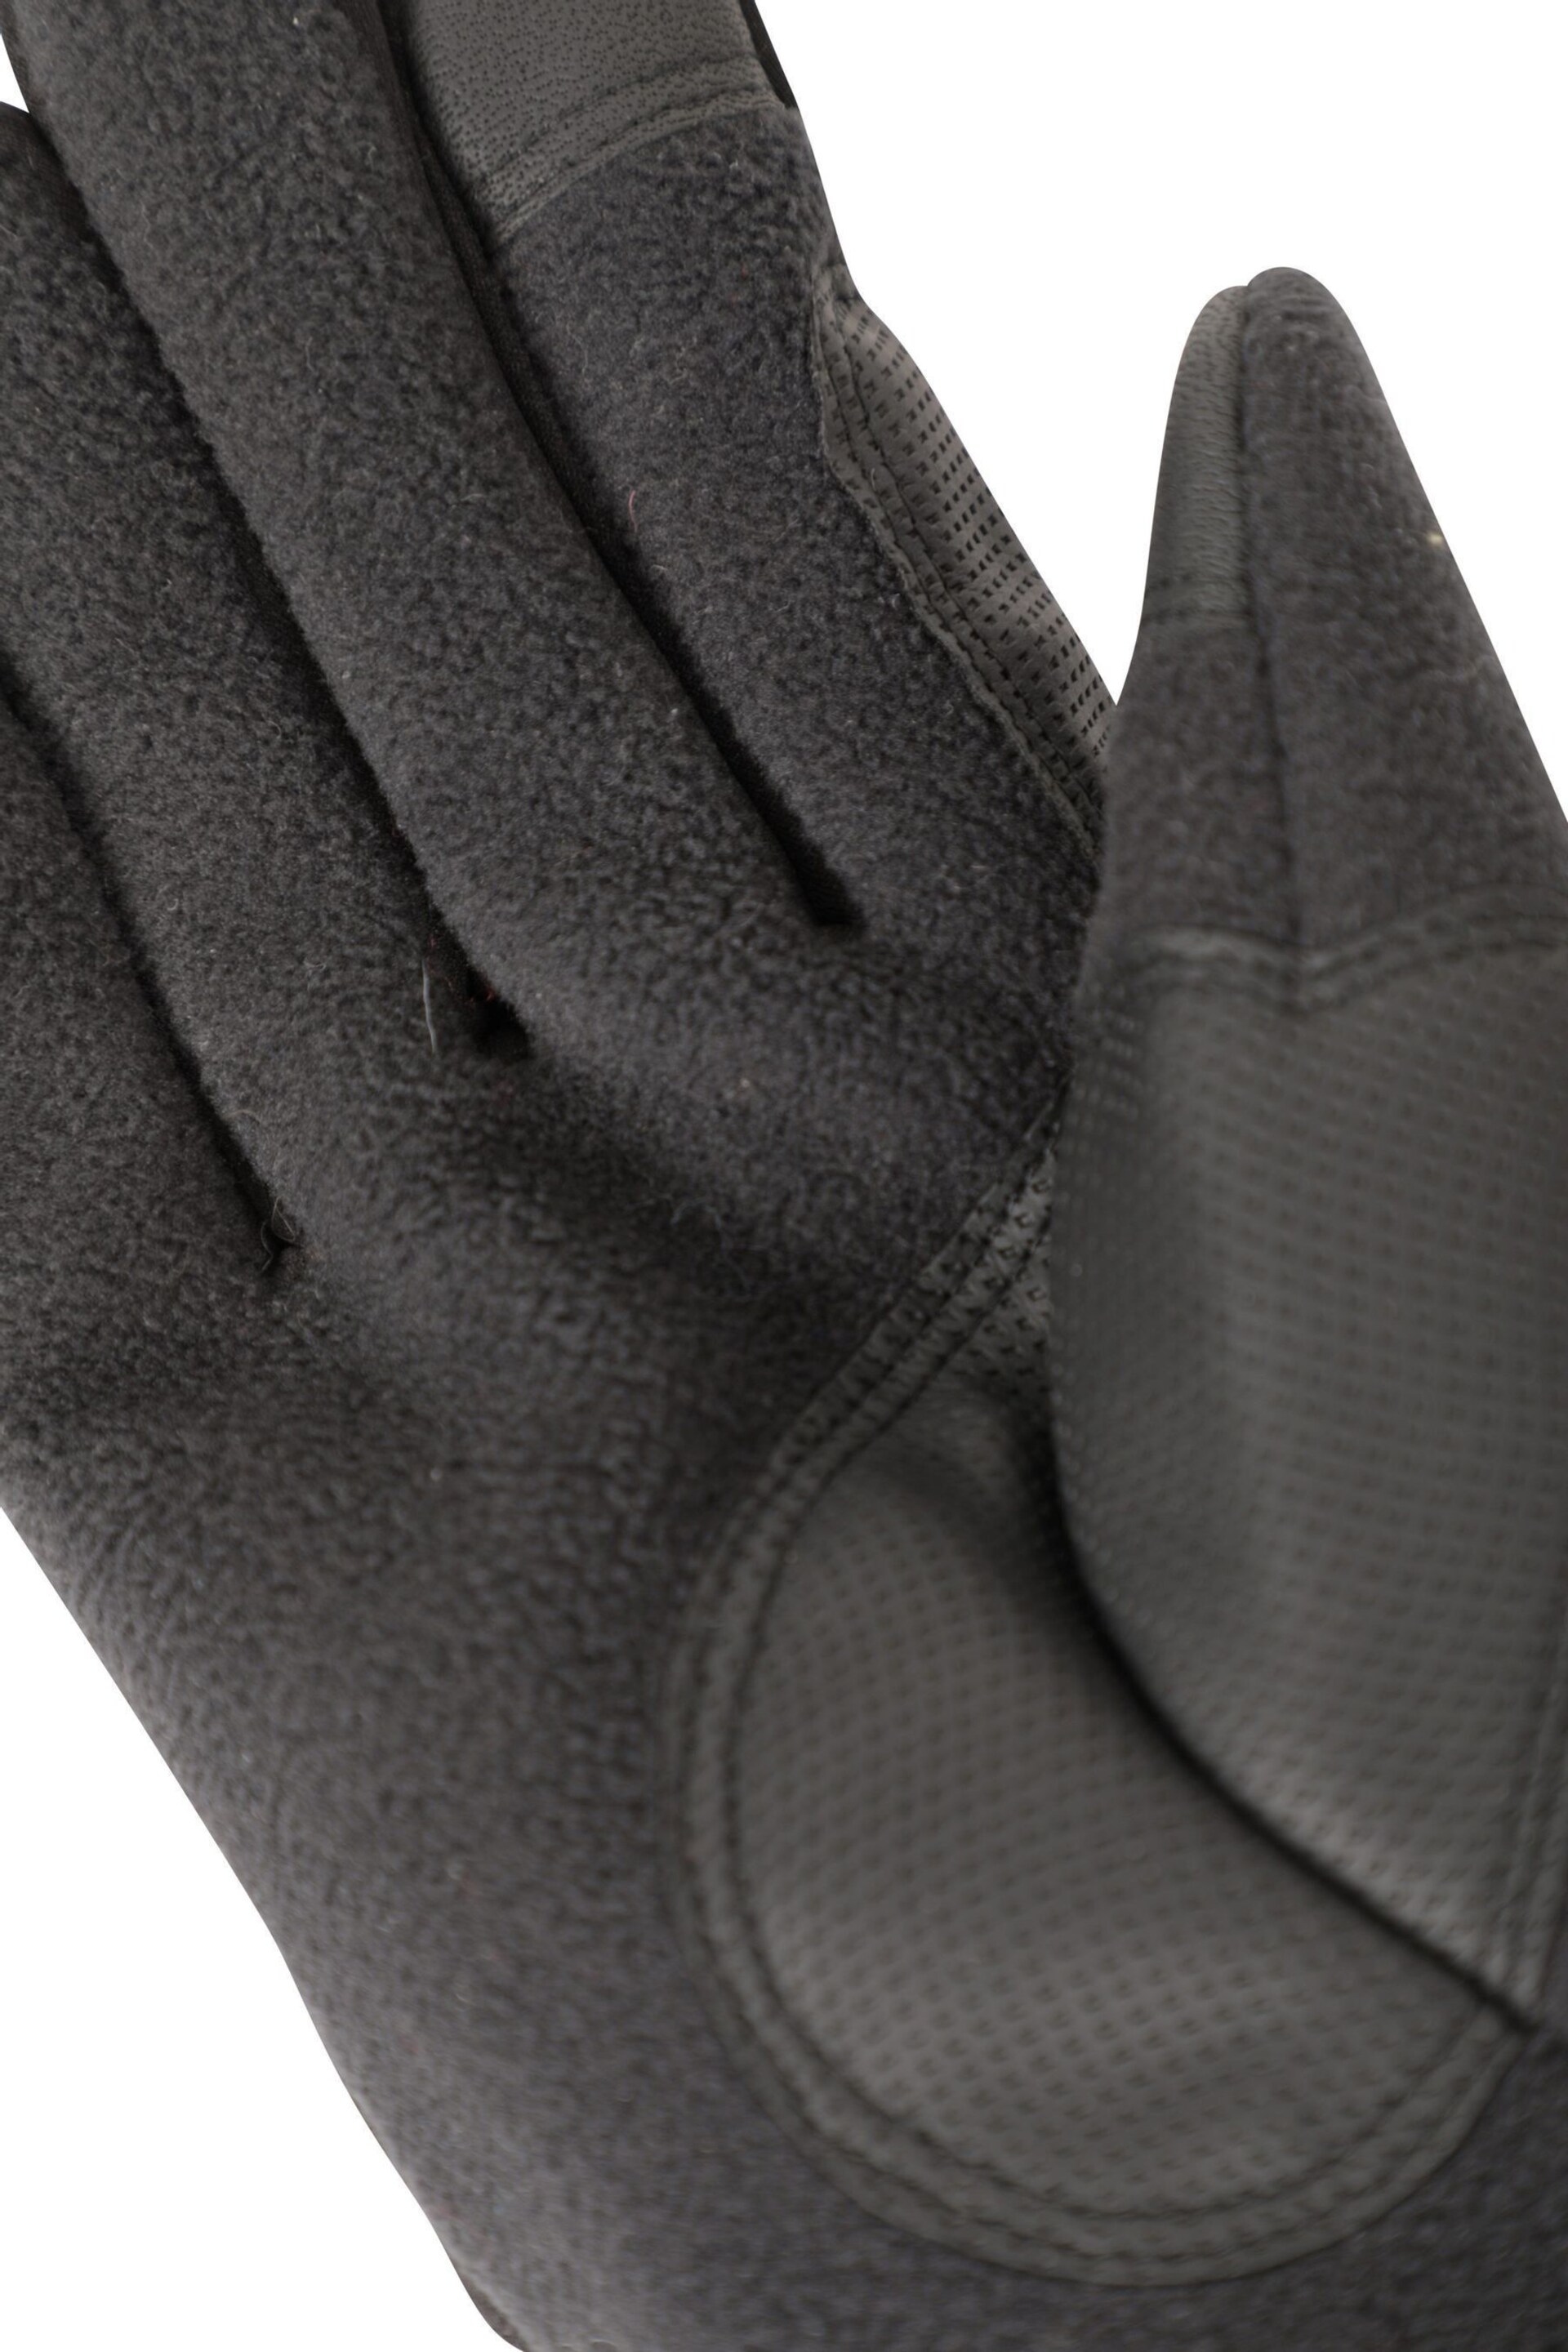 Mountain Warehouse Black Softshell Touchscreen Mens Gloves - Image 5 of 5